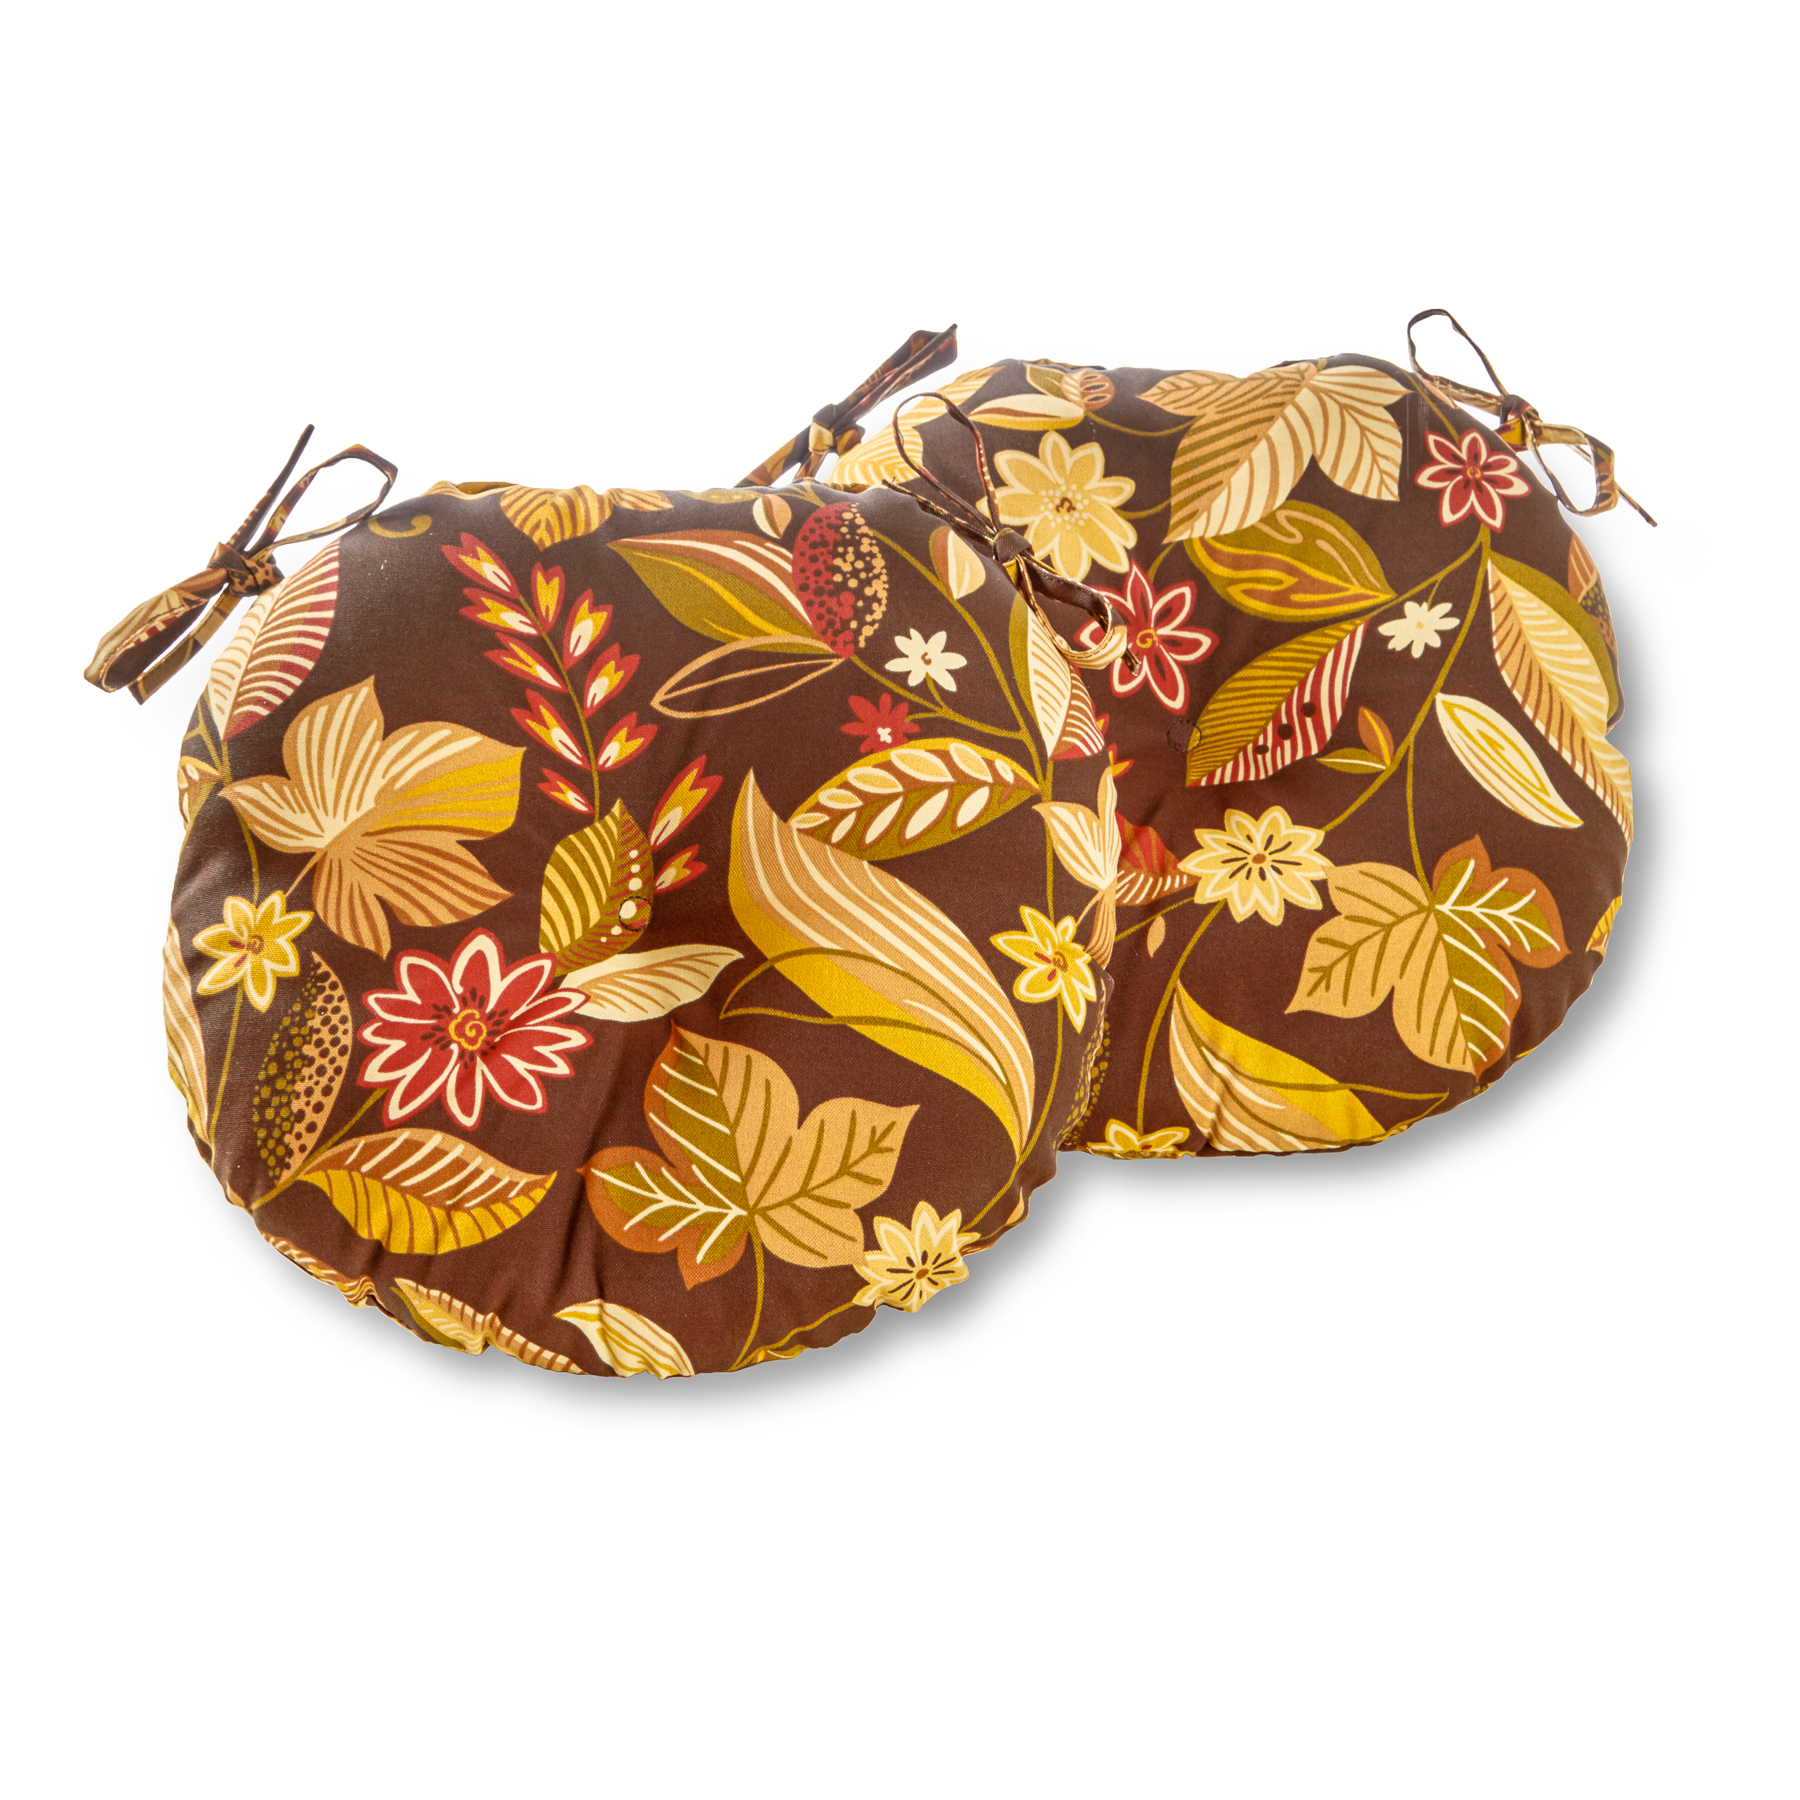 Greendale Home Fashions Timberland Floral 15 in. Round Outdoor Reversible Bistro Seat Cushion (Set of 2) - image 1 of 7